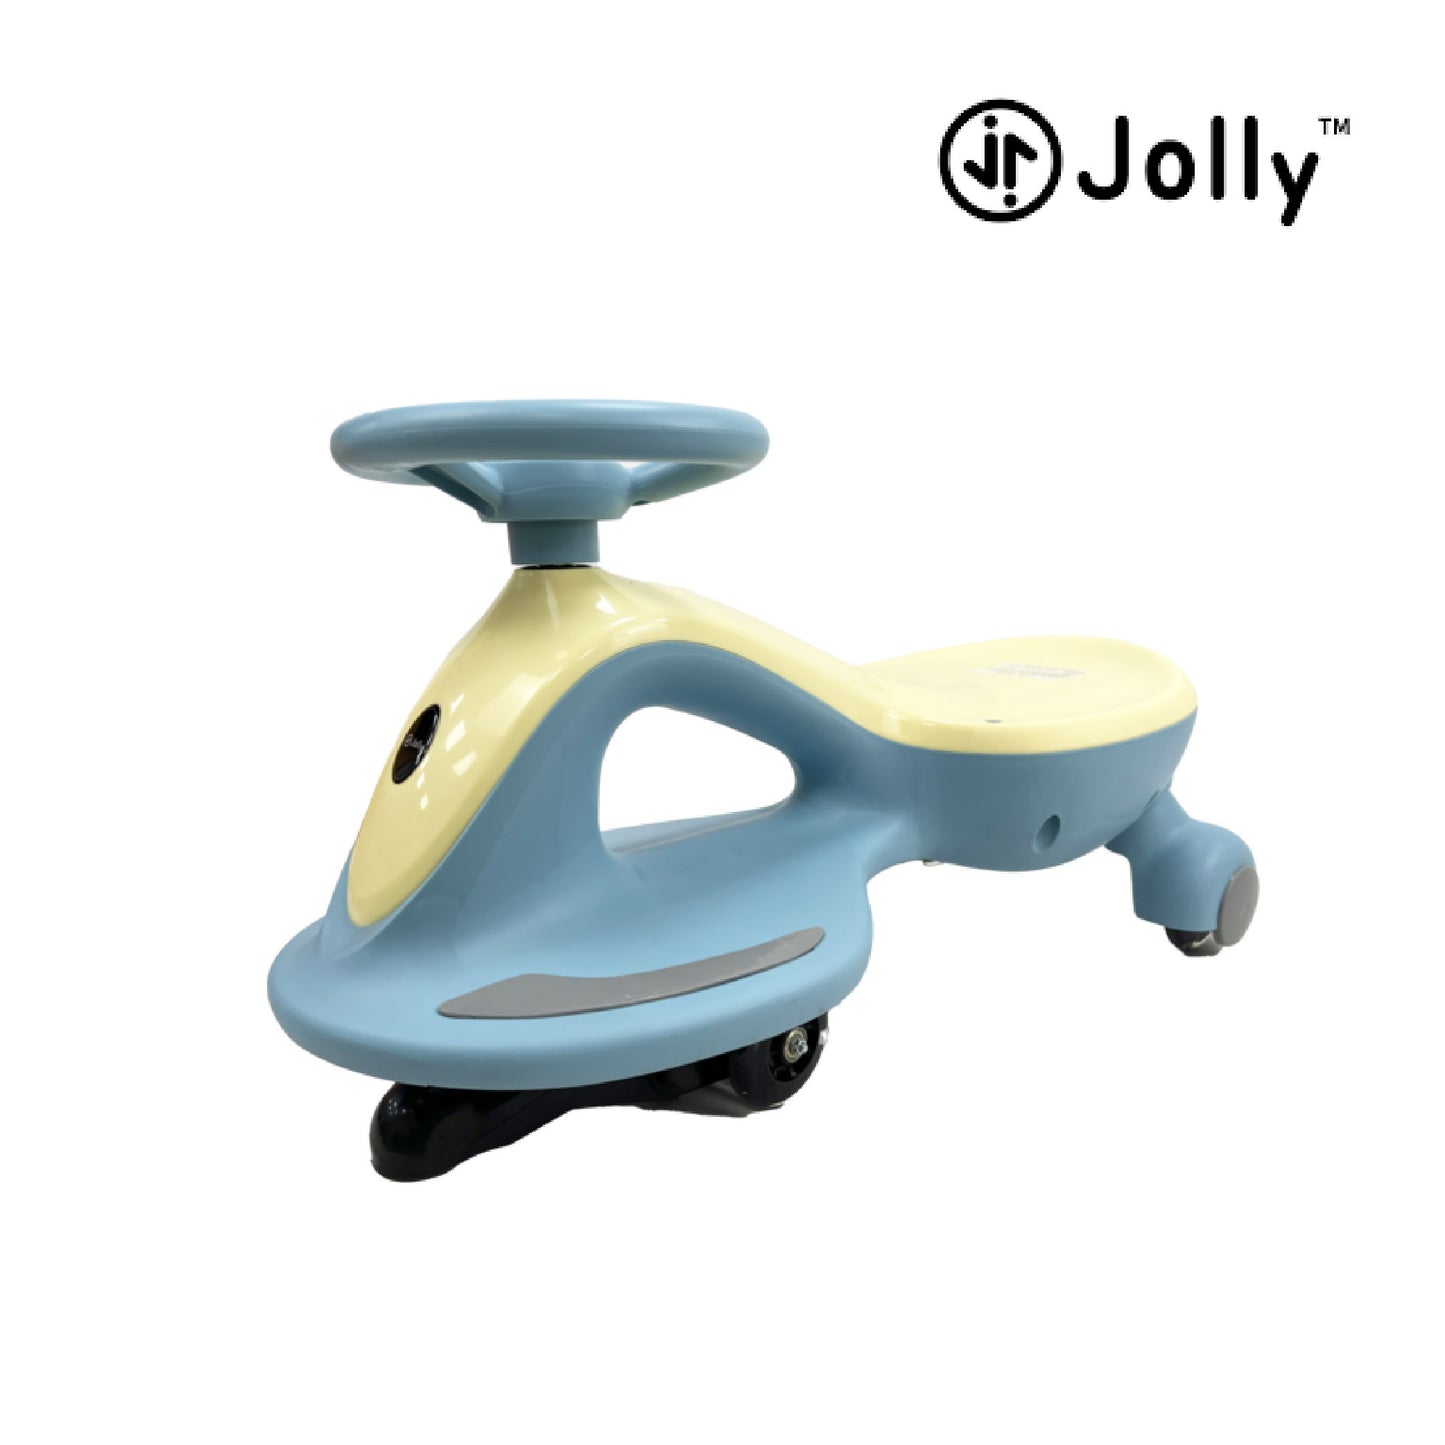 [Jolly UK] Electric Music Twist Car - 3 colors available